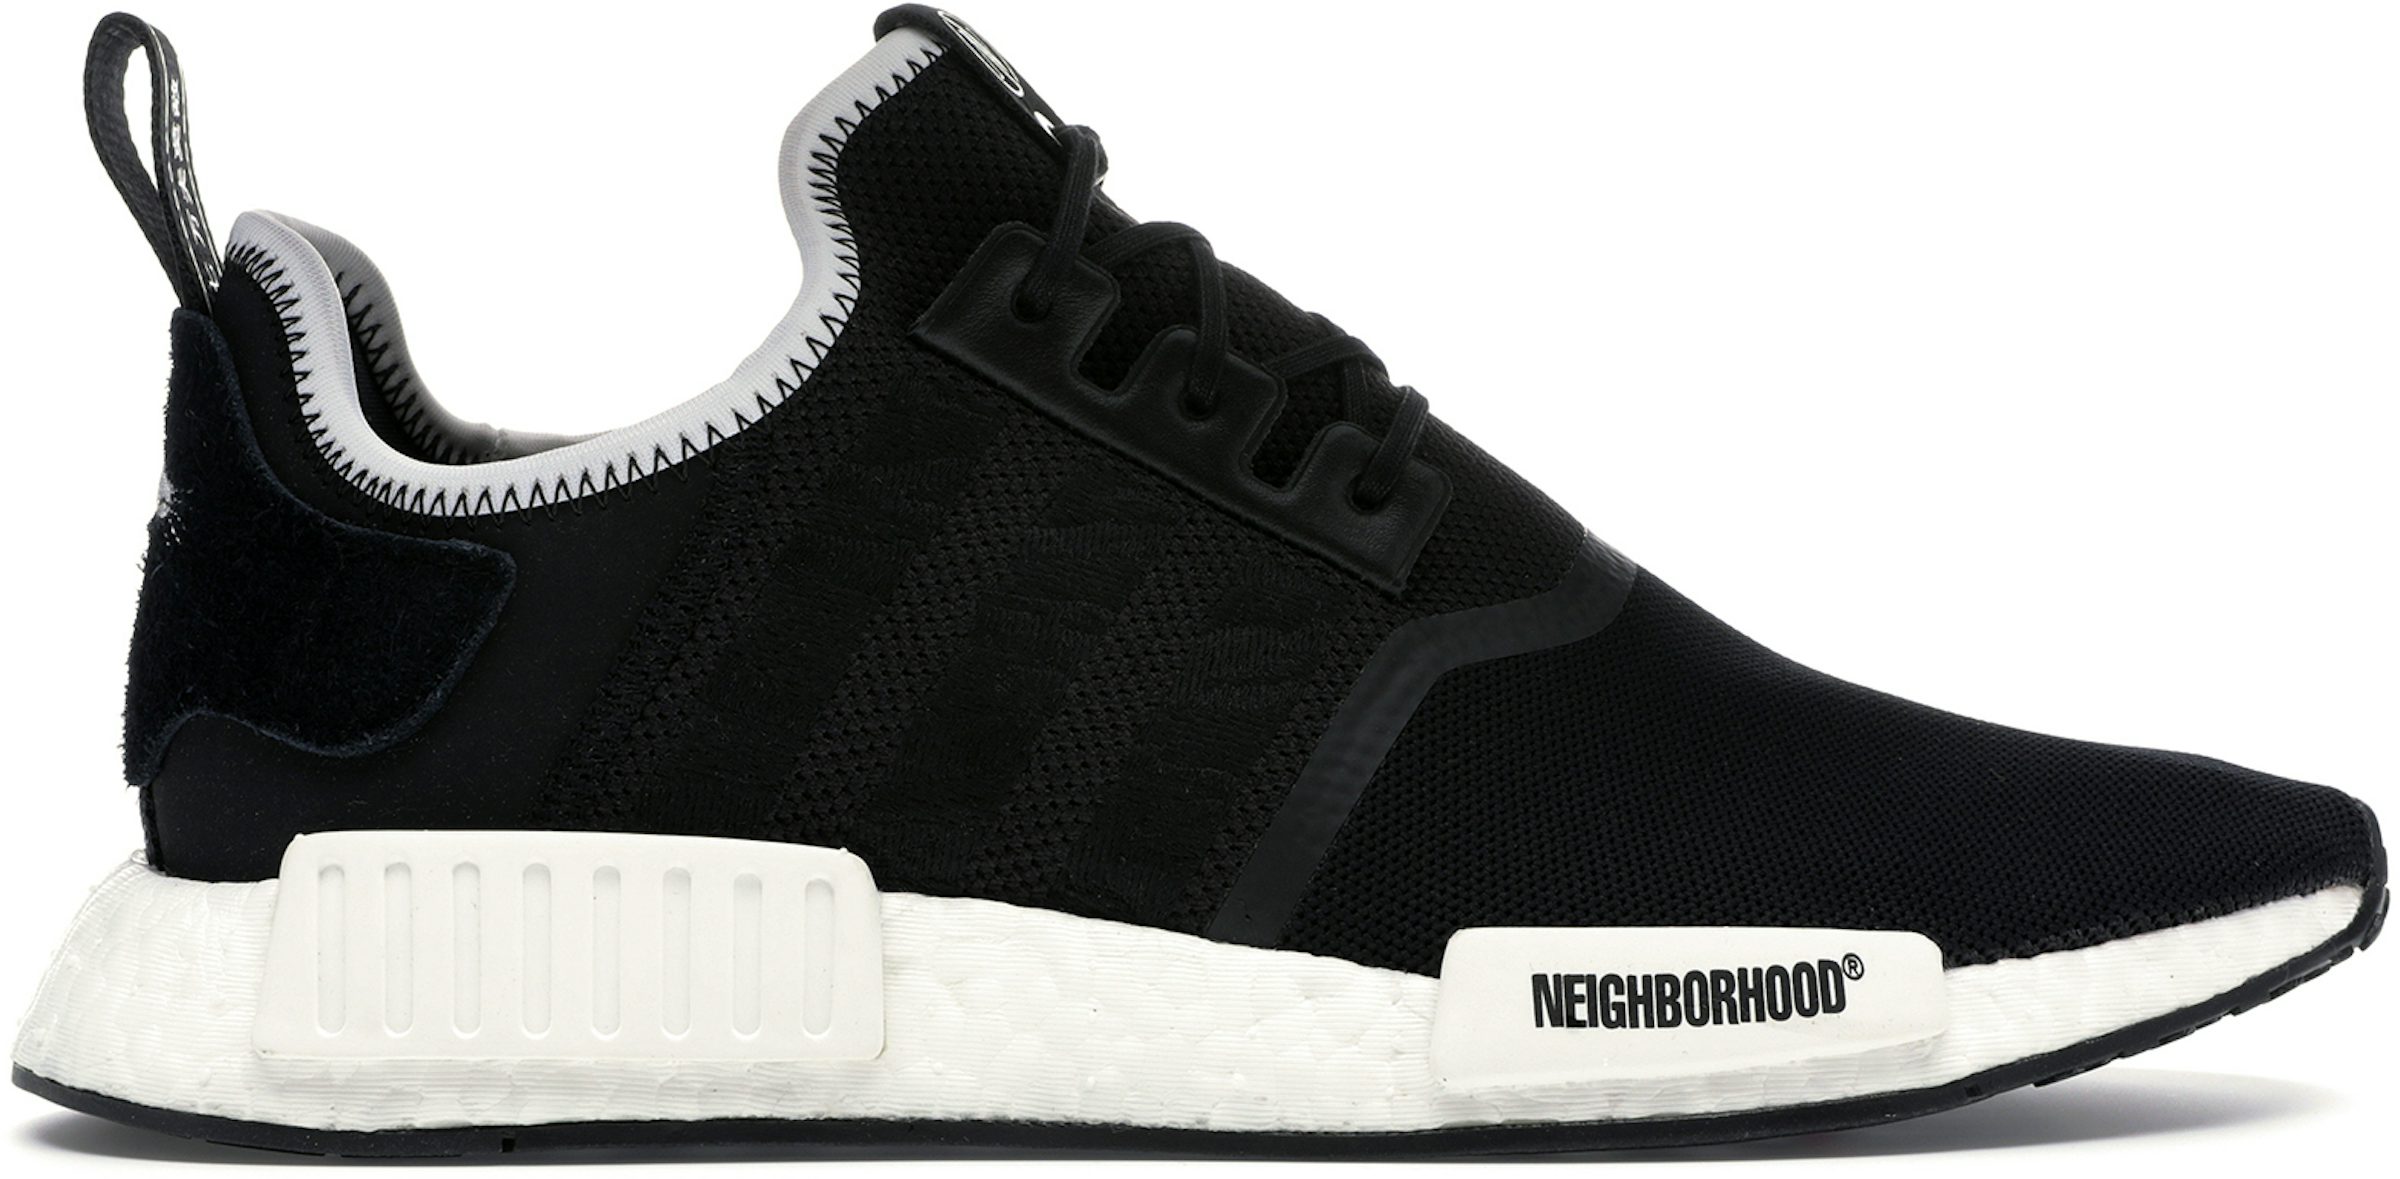 The 10 Most Expensive adidas NMD Sneakers - StockX News